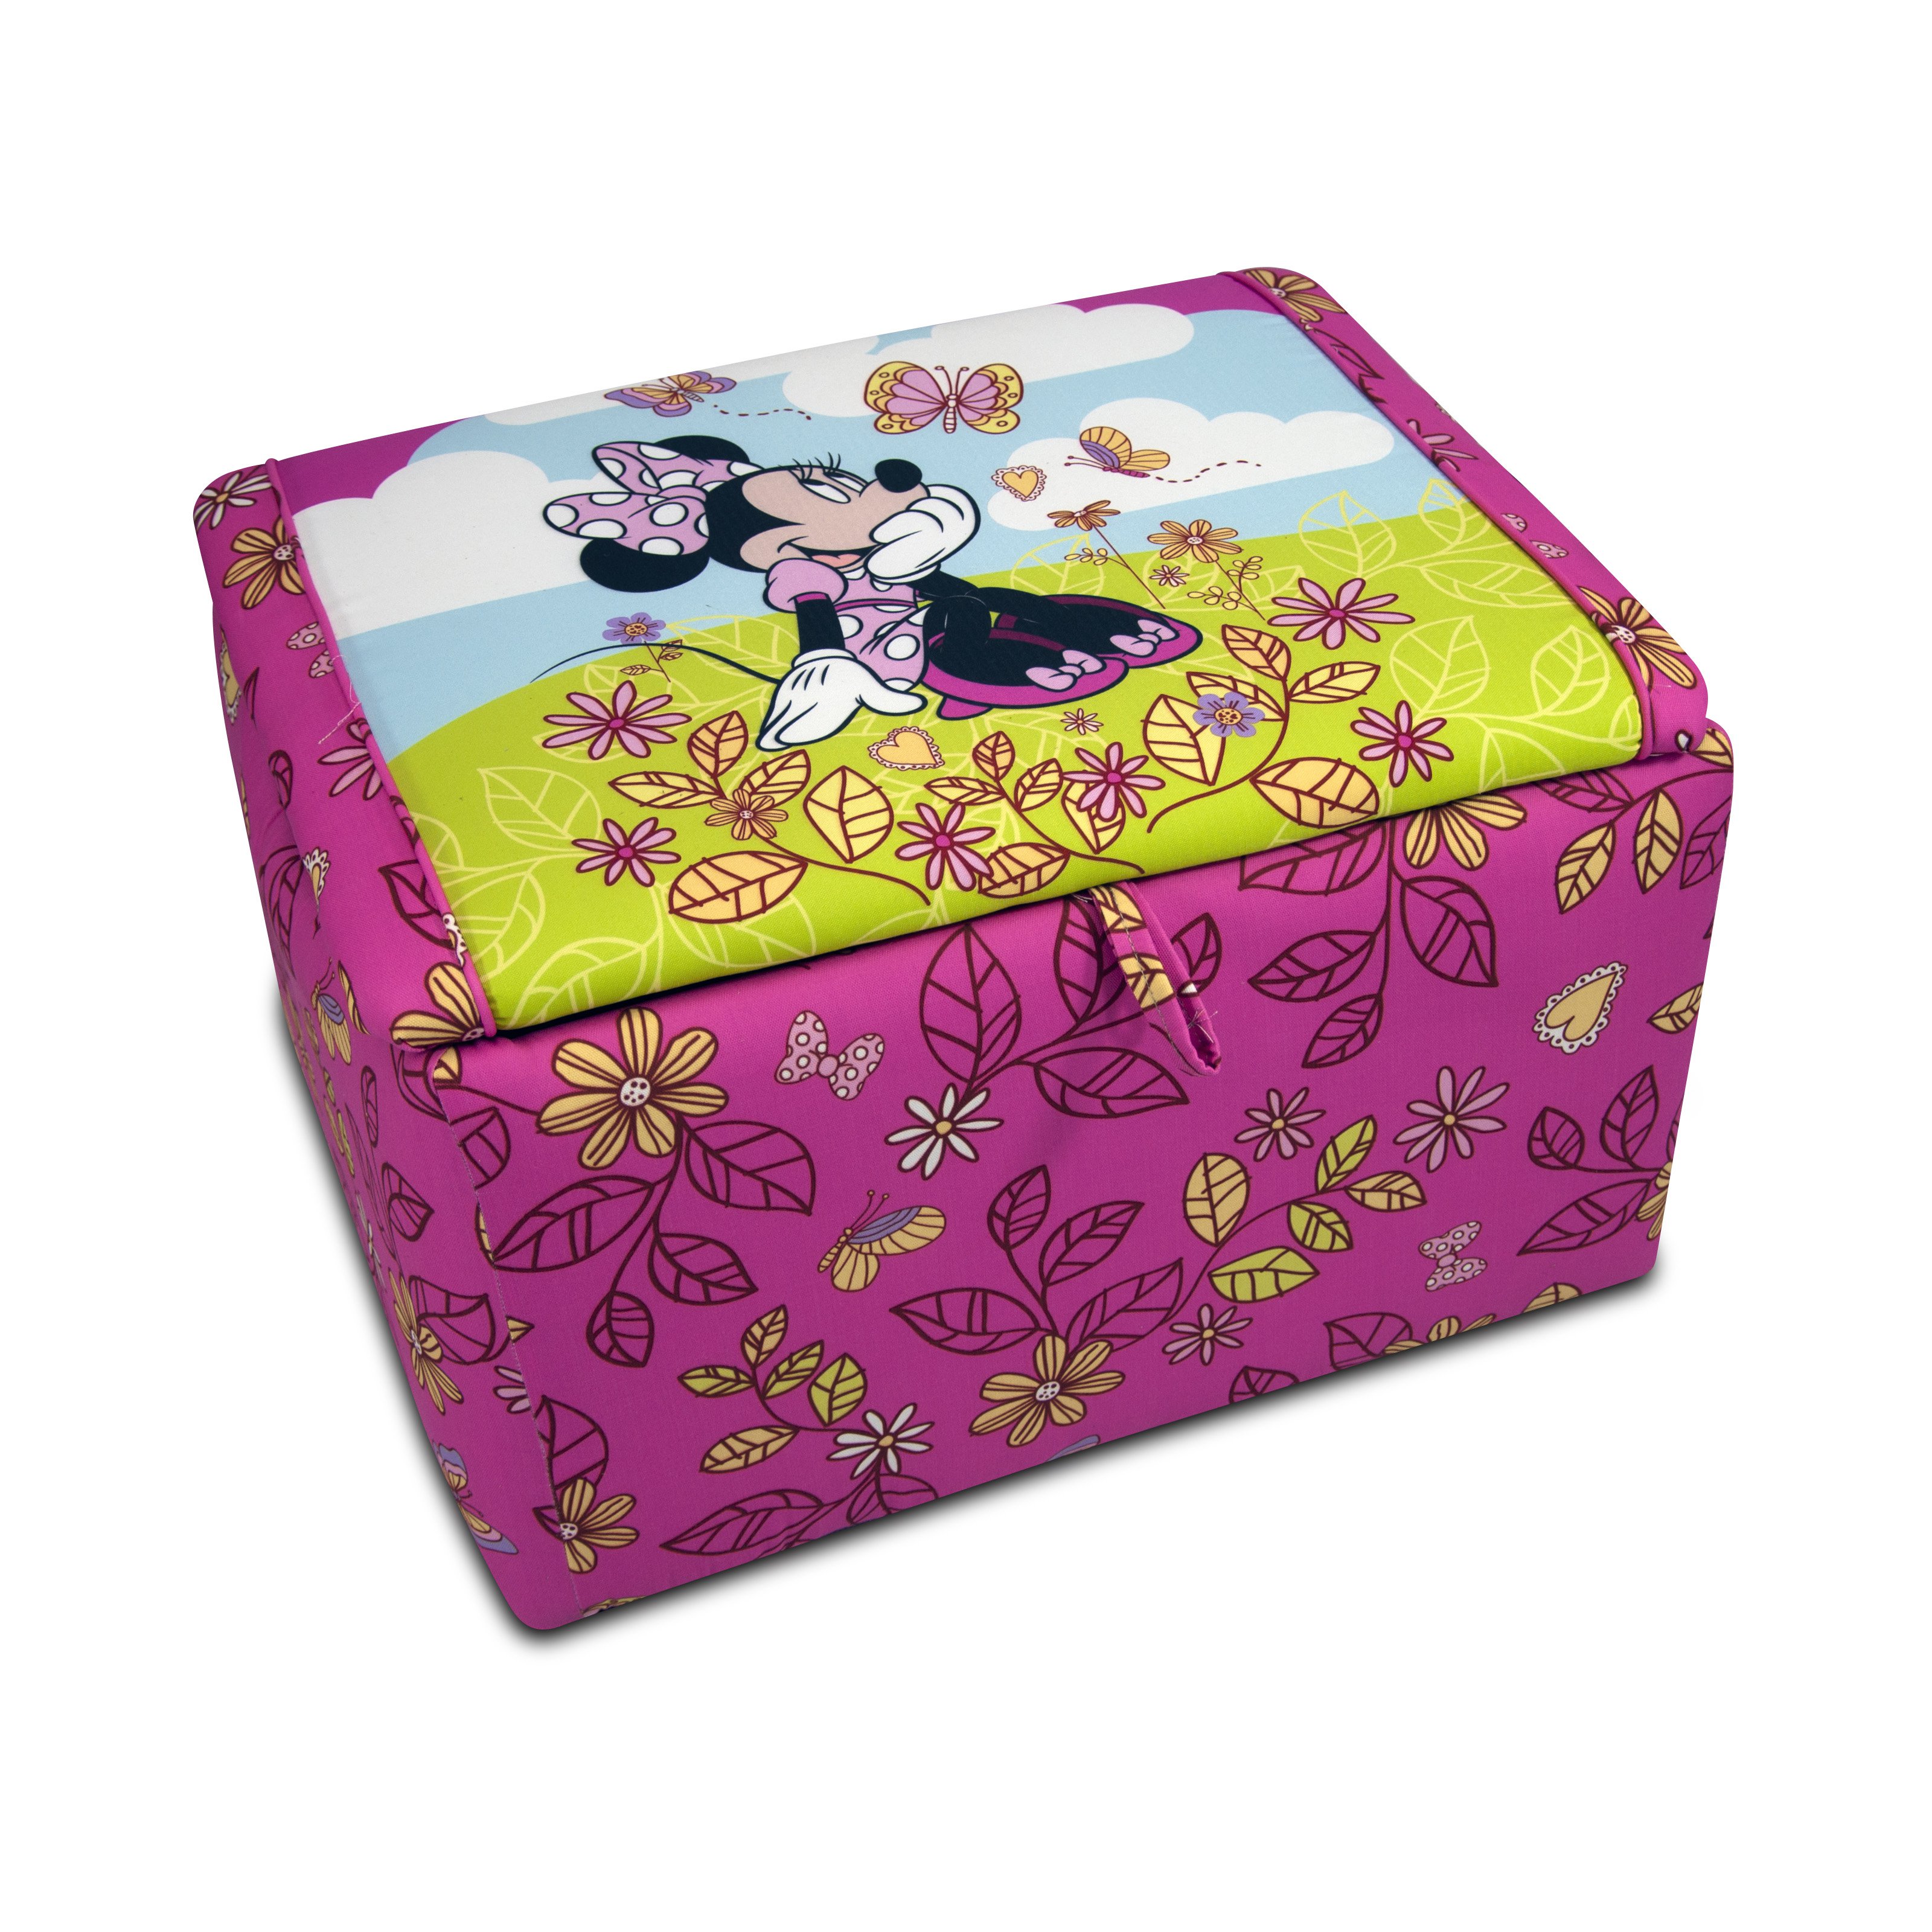 Disney Minnie Mouse Cuddly Cuties Upholstered Storage Box - image 1 of 1